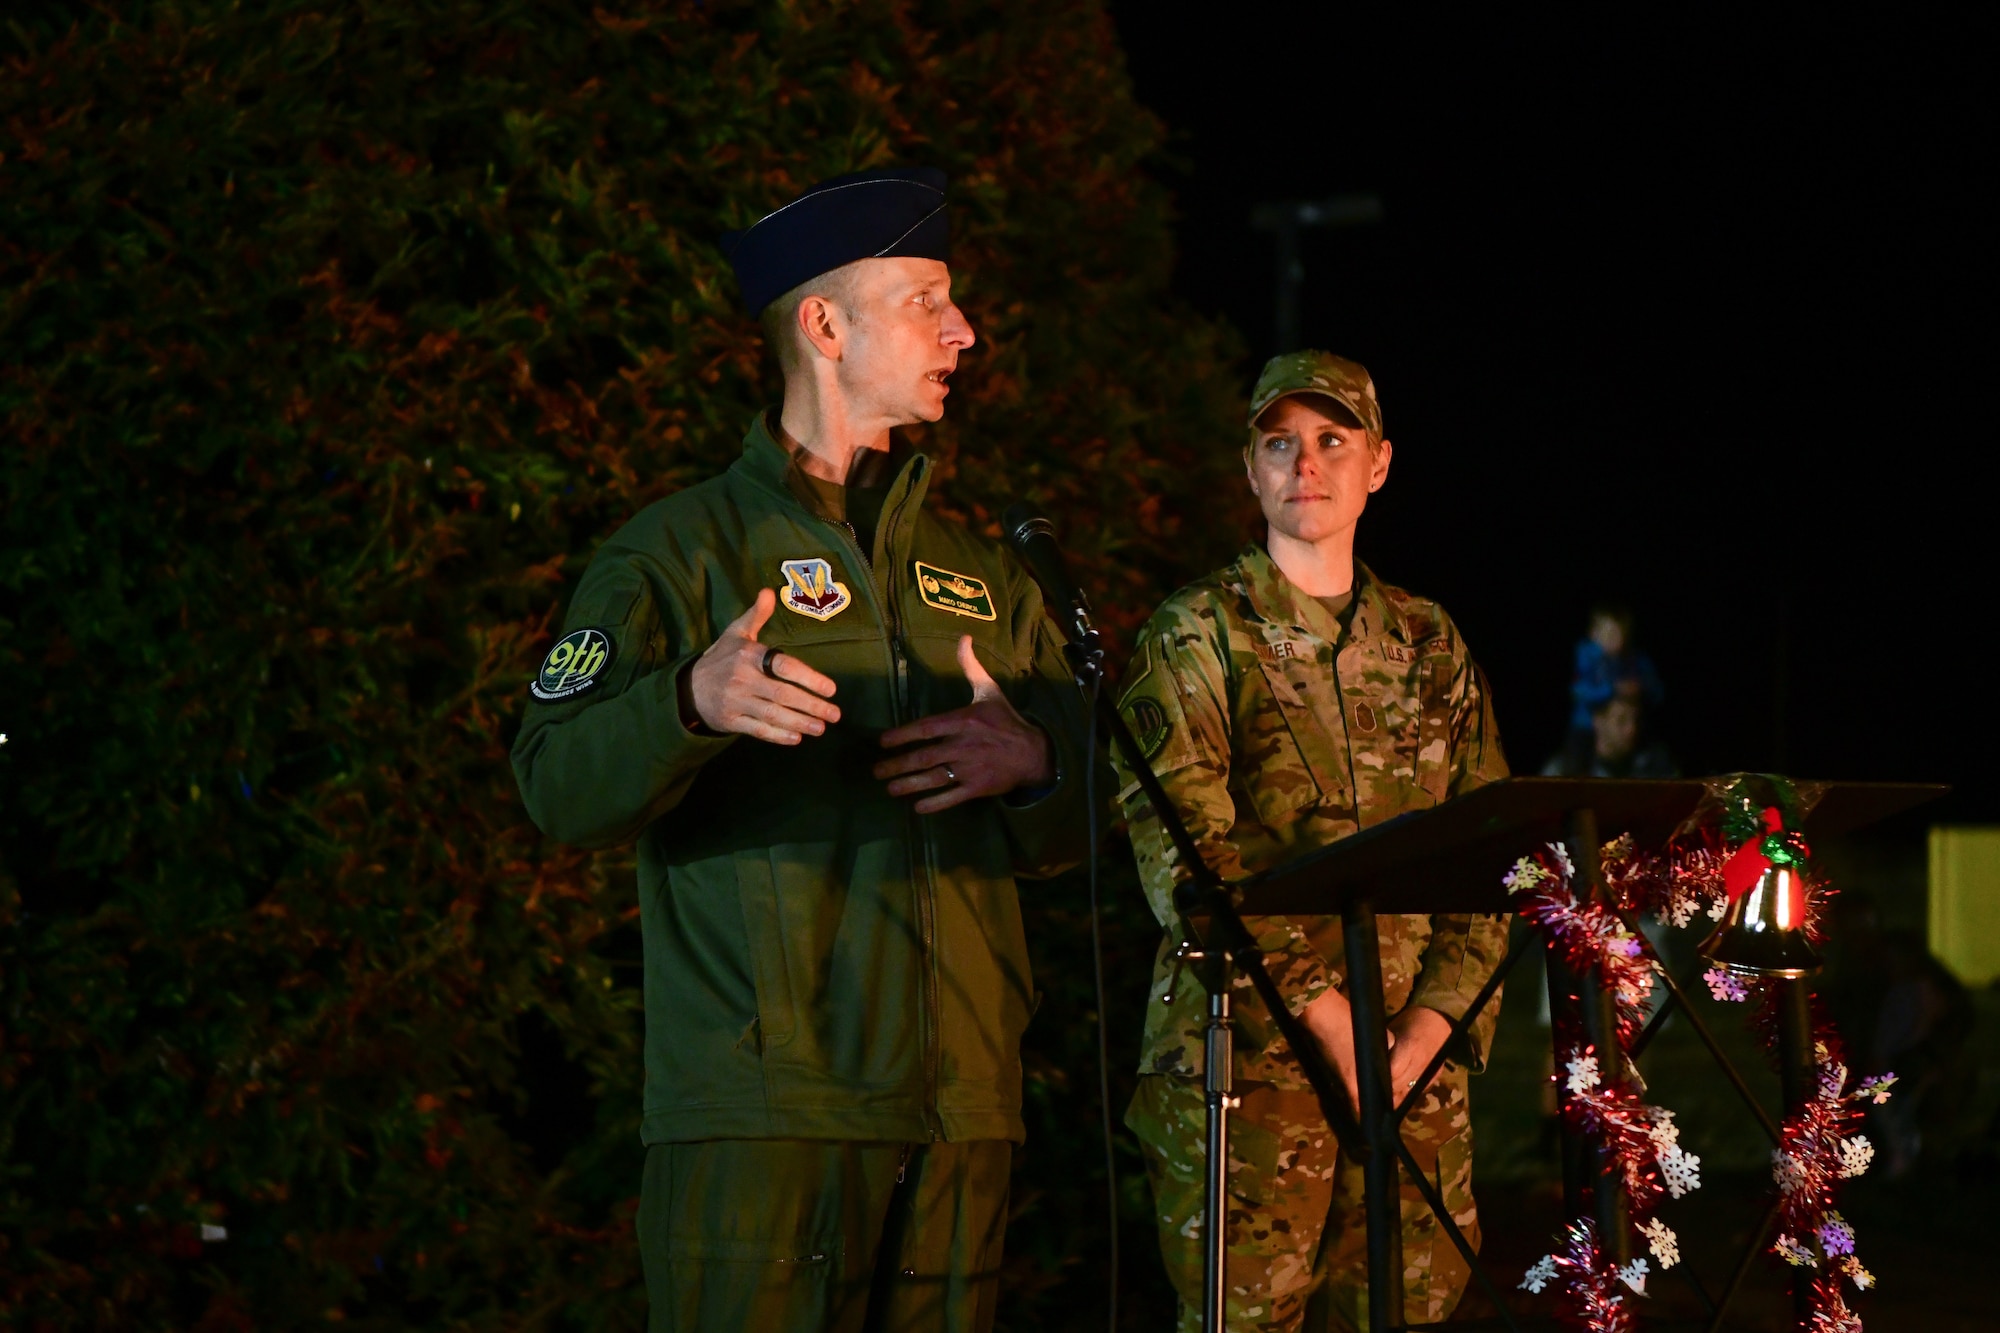 Col. Geoffrey Church, 9th Reconnaissance Wing commander, and Command Chief Master Sgt. Breana Oliver, 9th Reconnaissance Wing command chief, deliver opening remarks during the Christmas tree lighting event at Beale Air Force Base, Calif., on Dec. 2, 2022.